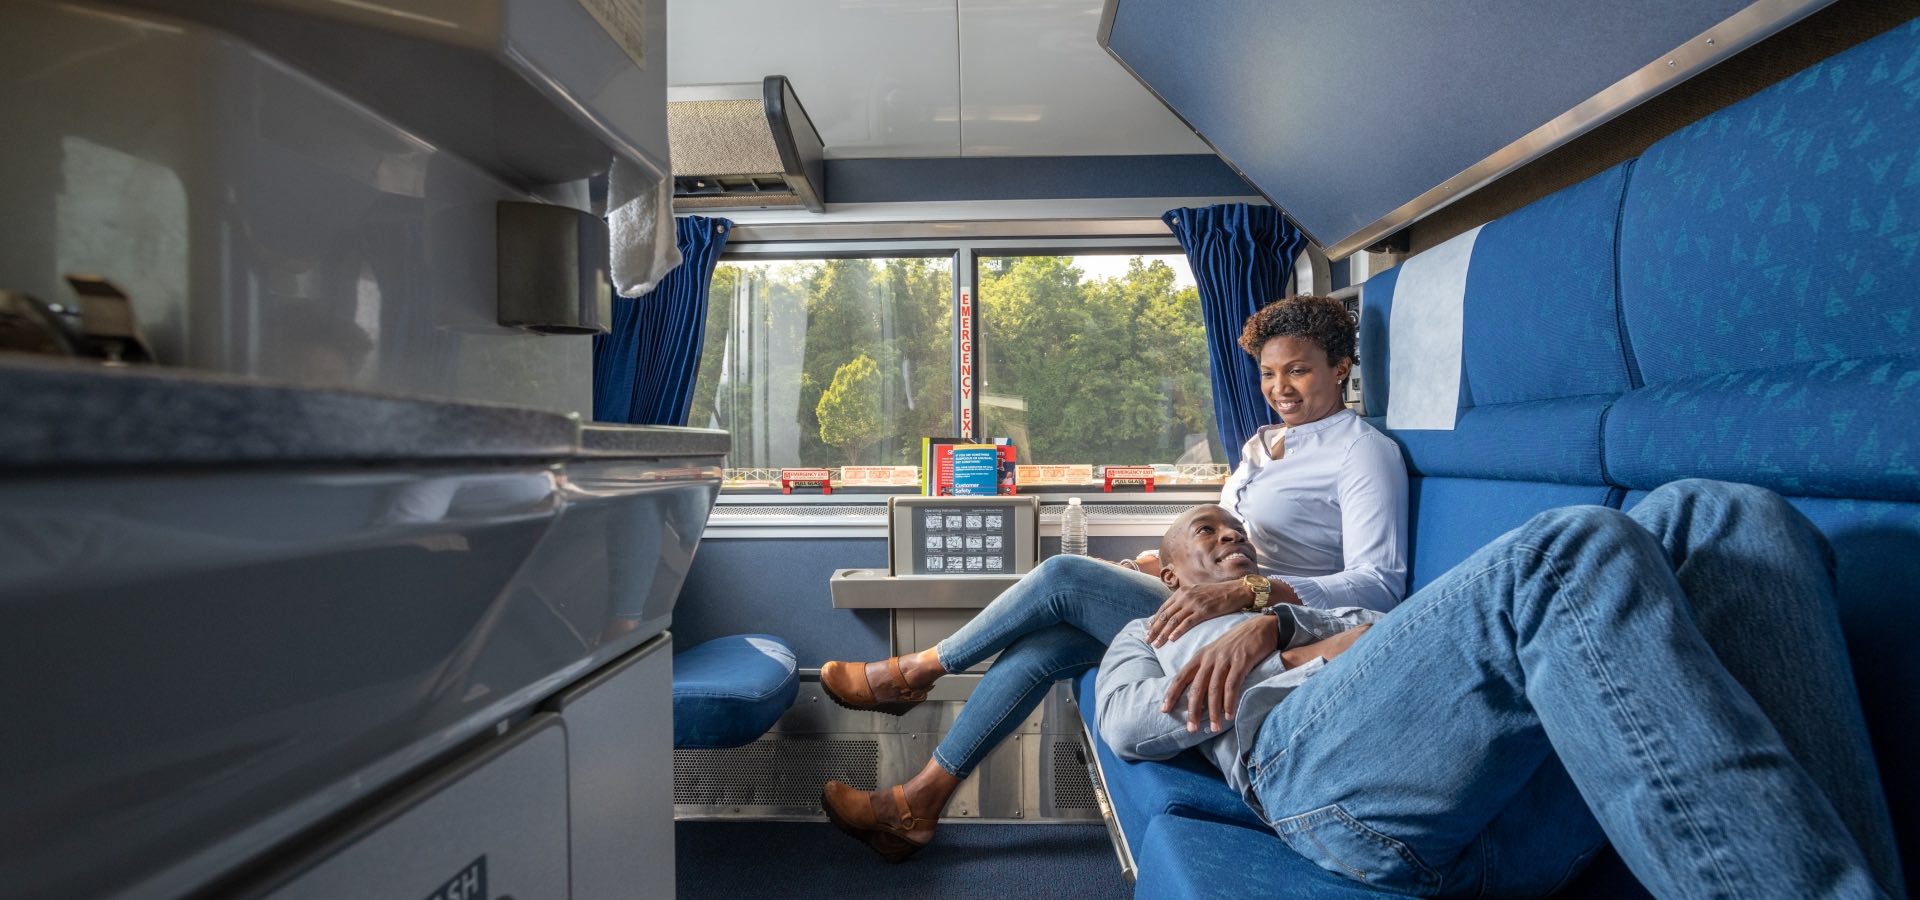 a man and woman sitting on a couch in a train